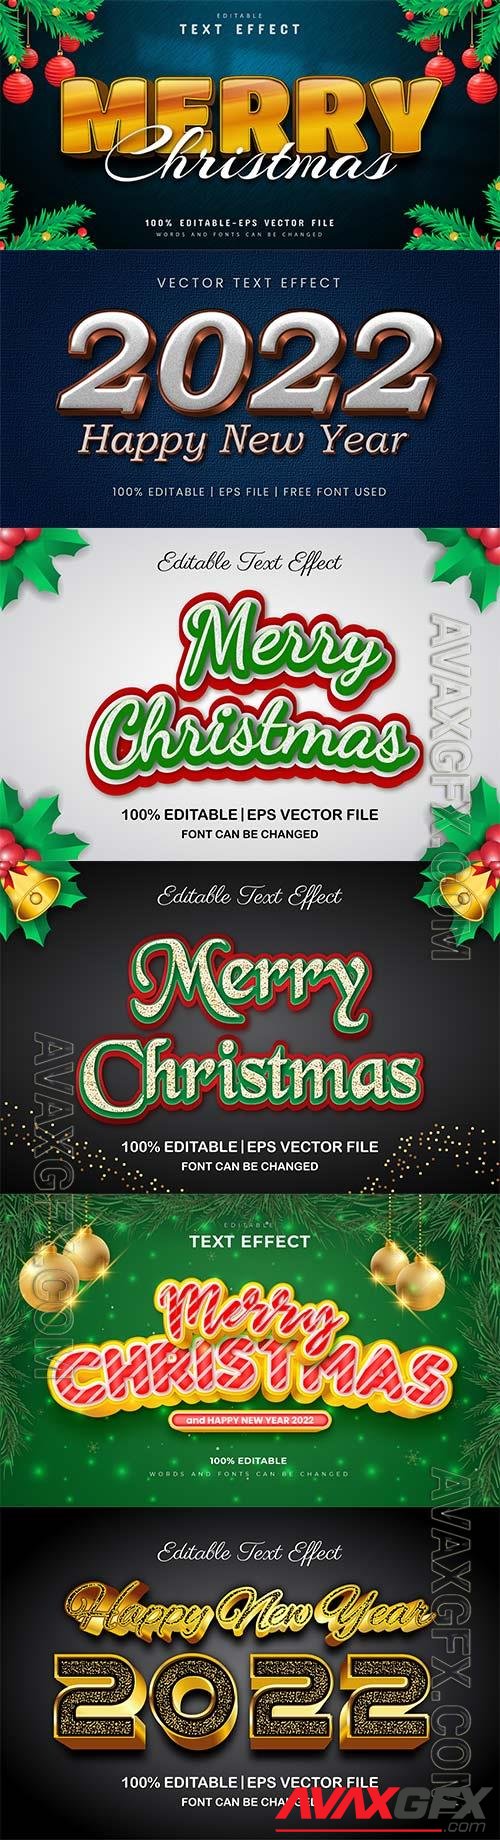 Merry christmas and happy new year 2022 editable vector text effects vol 11